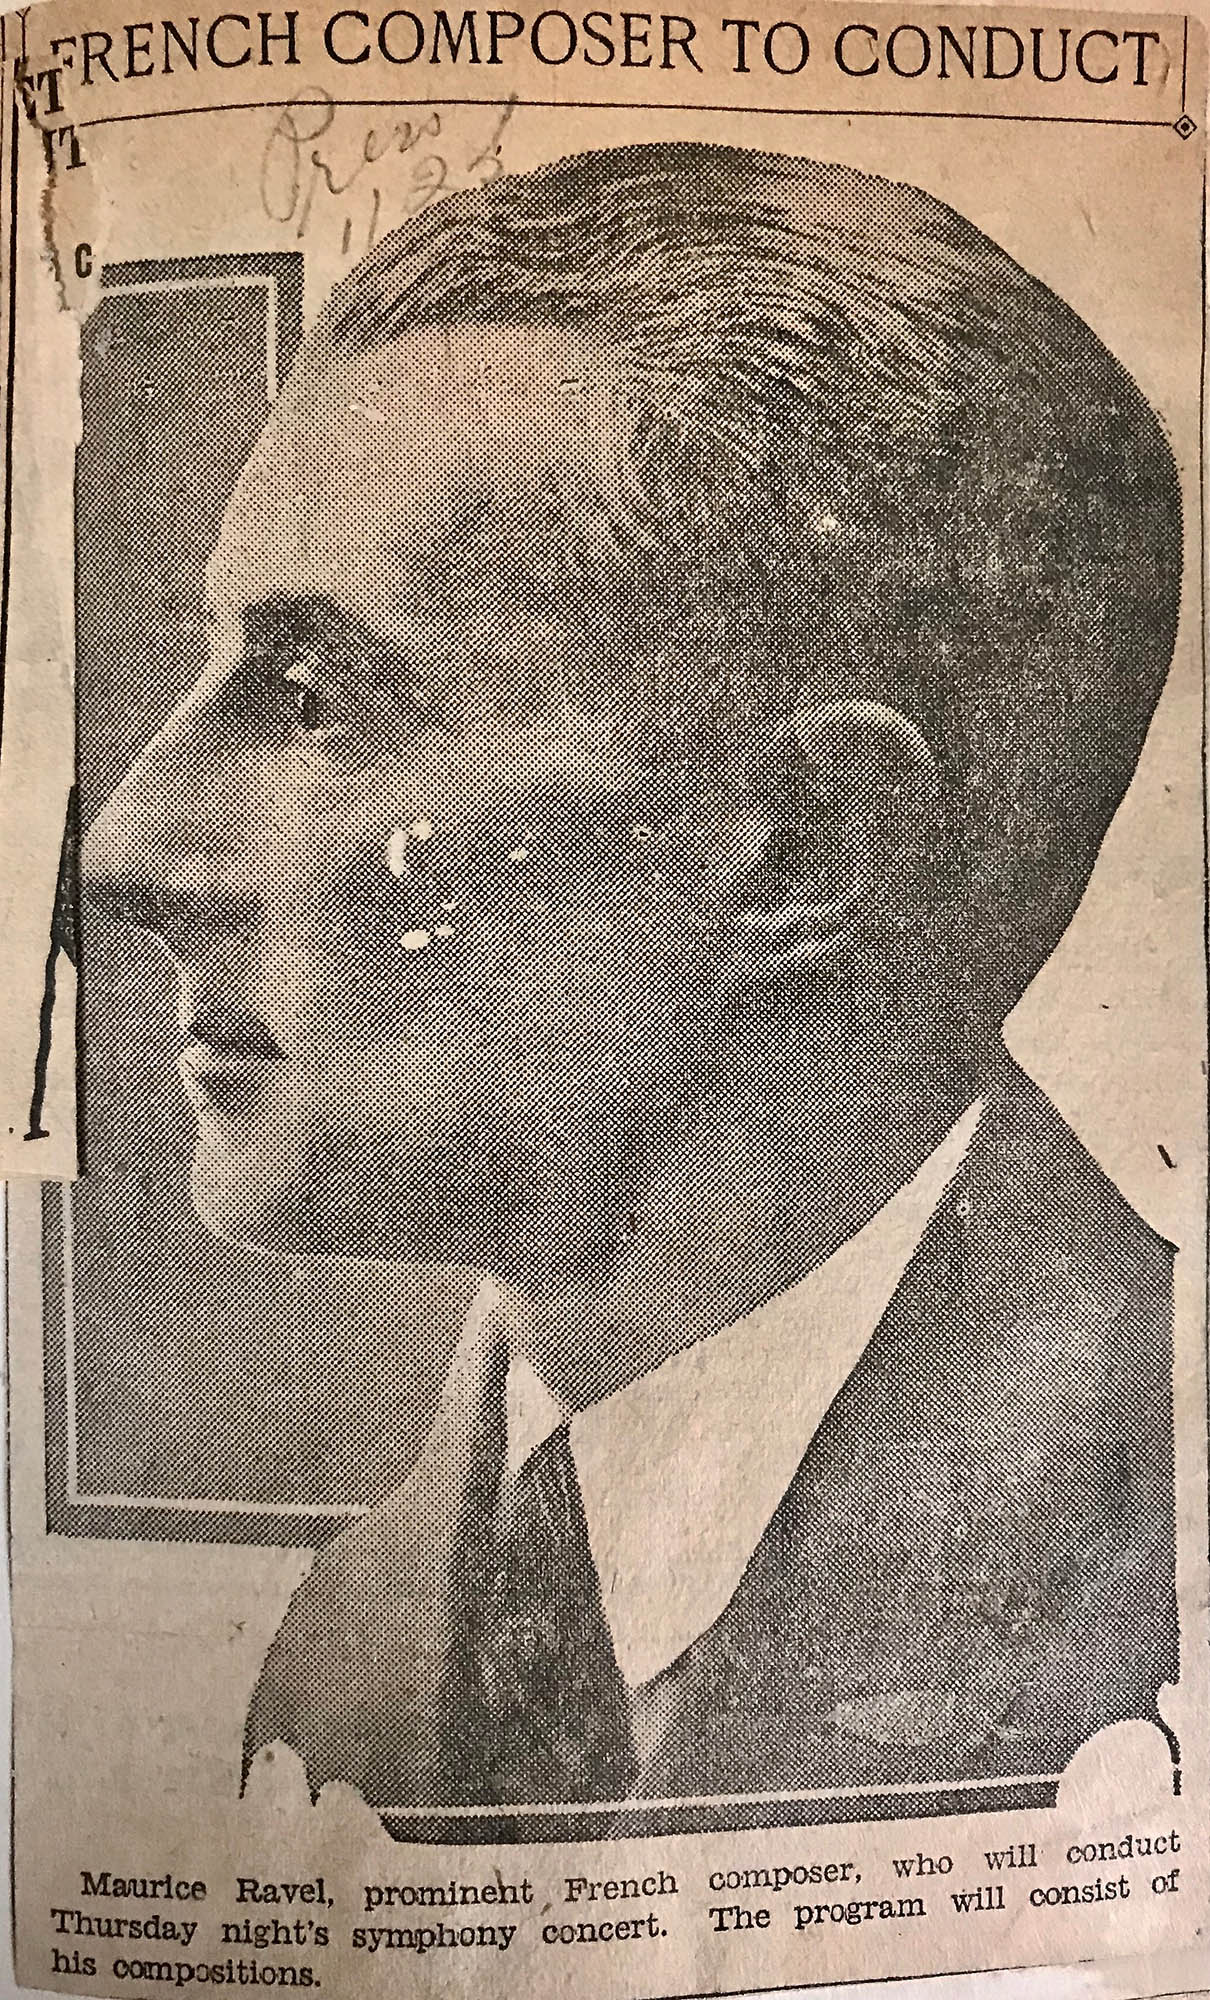 Portrait of Maurice Ravel with the headline, “French Composer to Conduct”